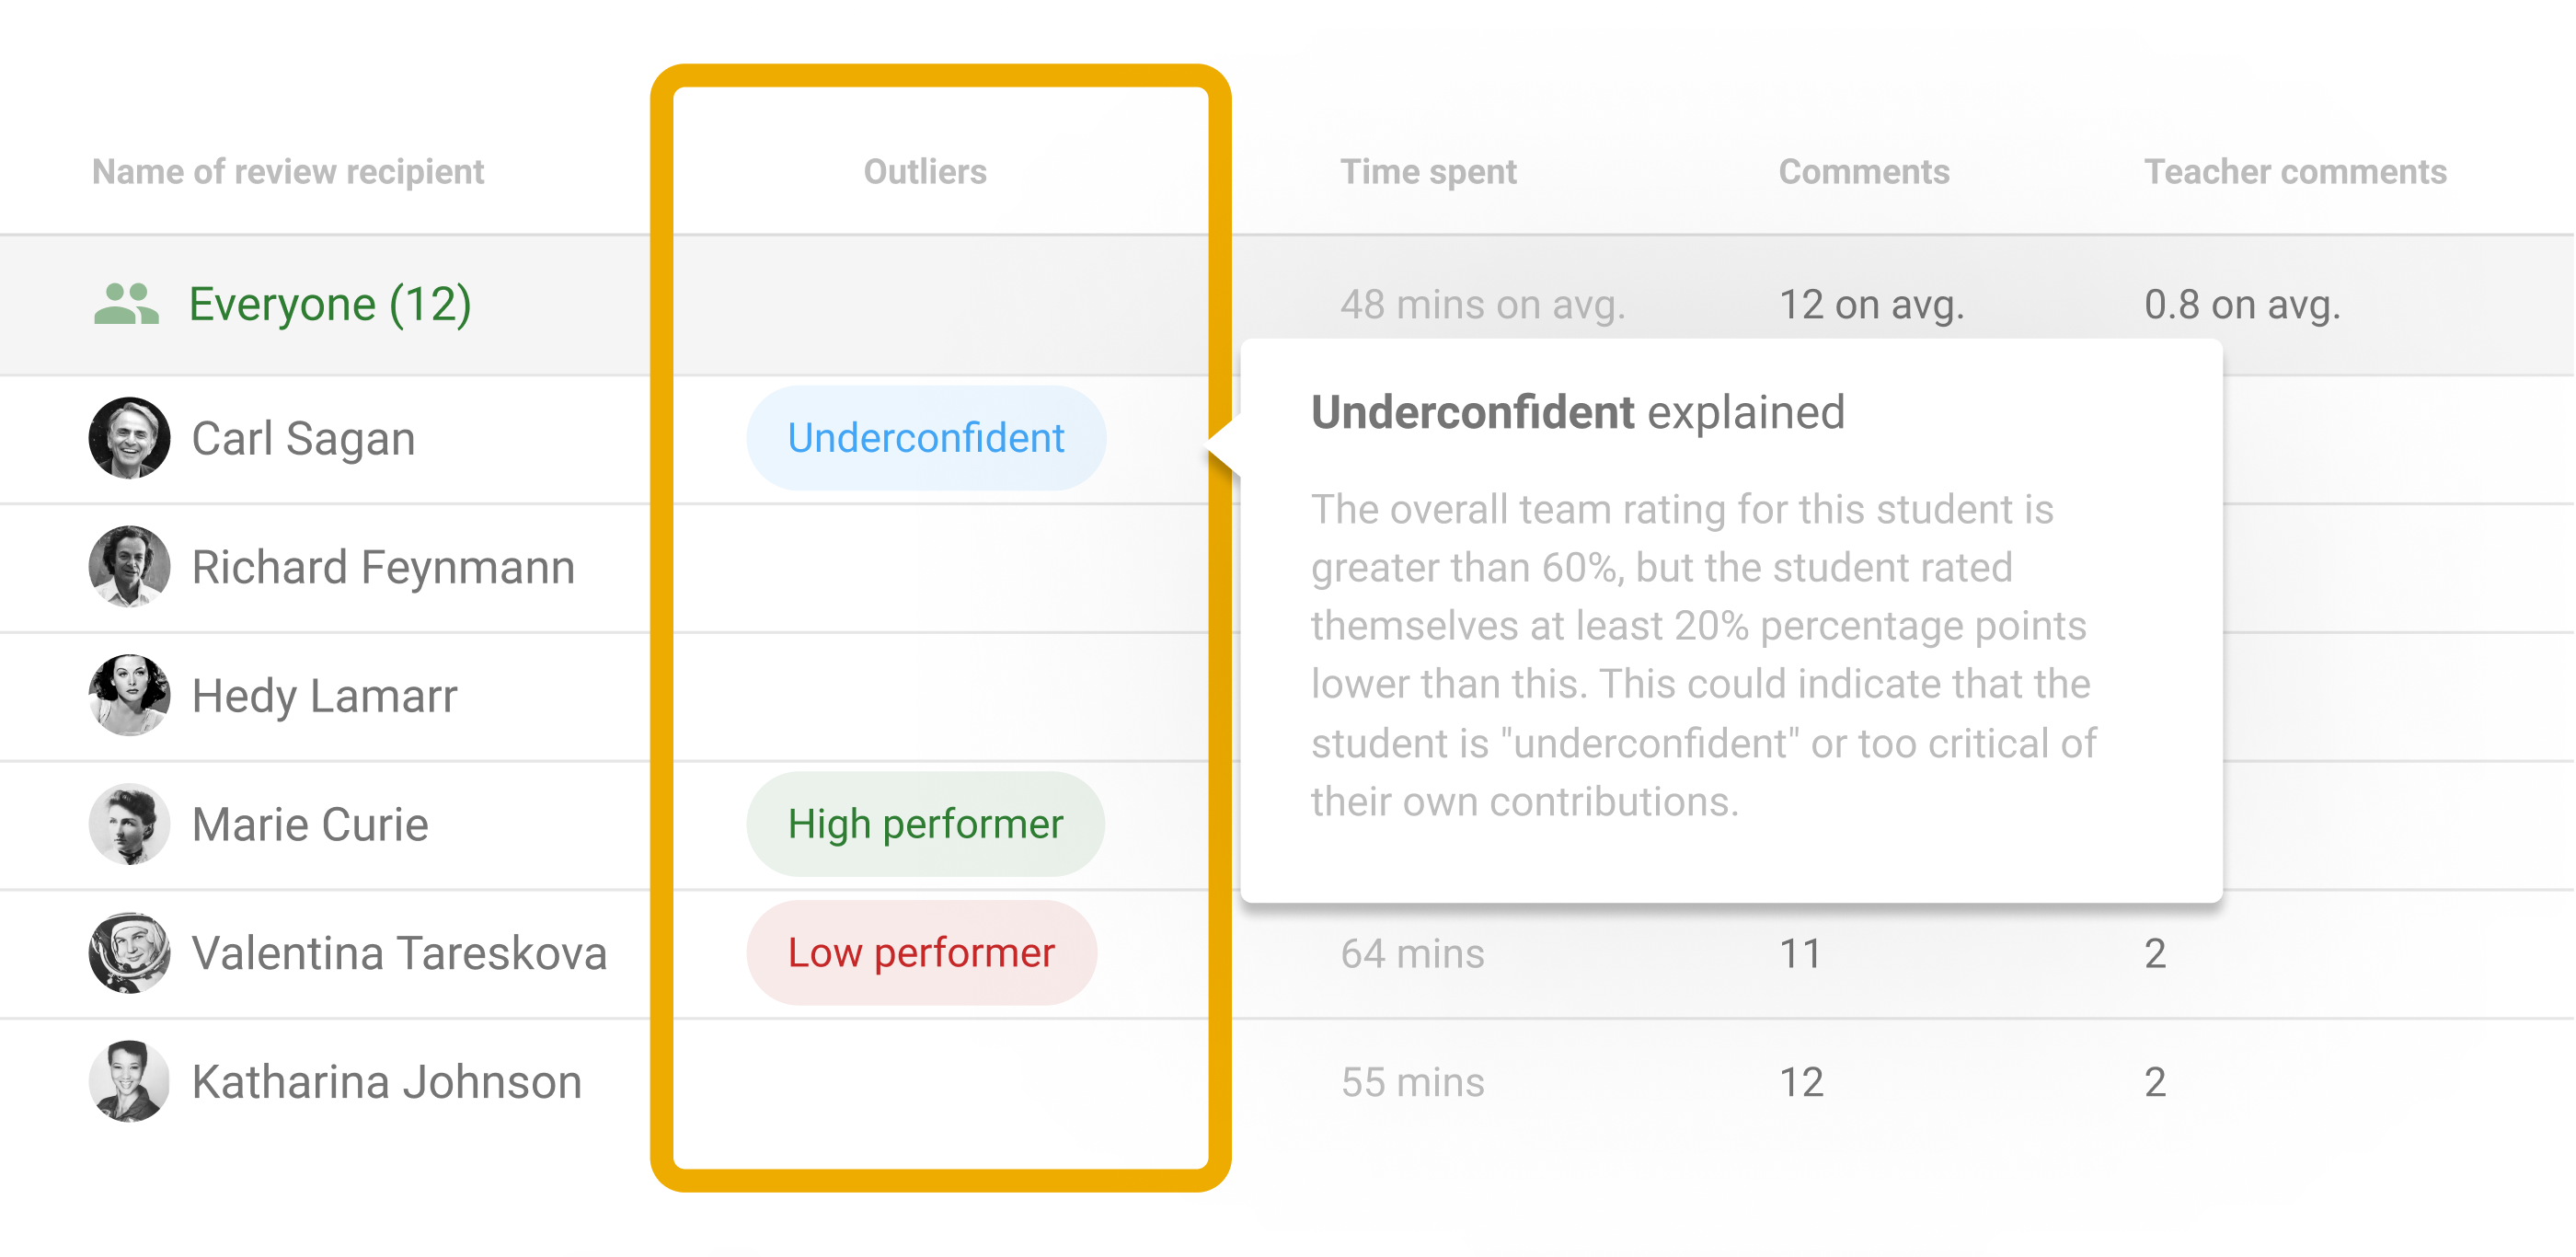 5 columns: Name of Review Recipient, Outliers, Time spent, Comments, Teacher Comments. Box around the Outliers column, with callout for example of 